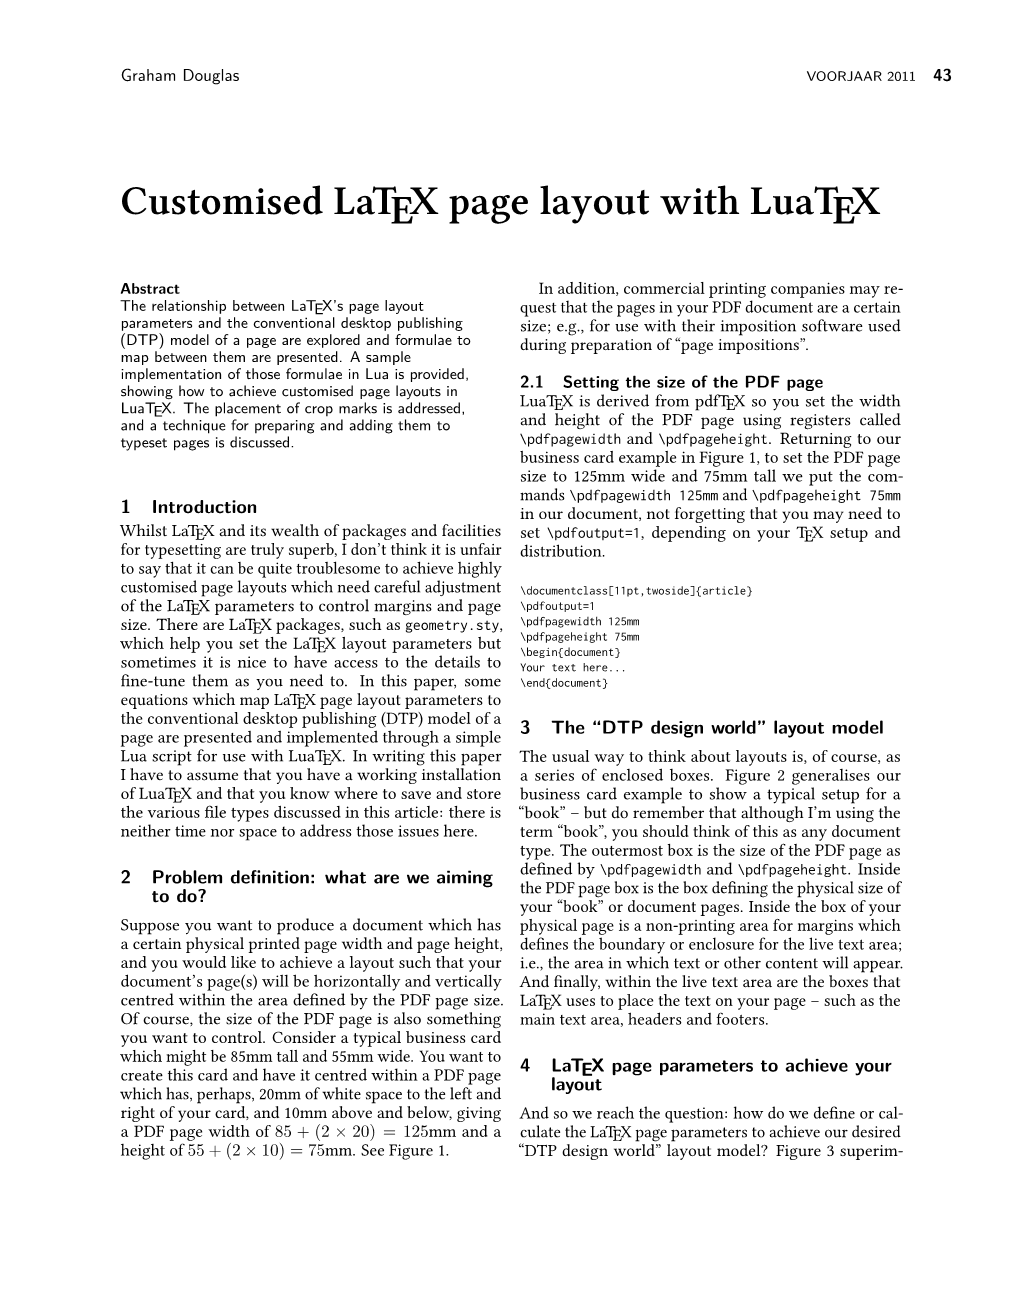 Customised Latex Page Layout with Luatex